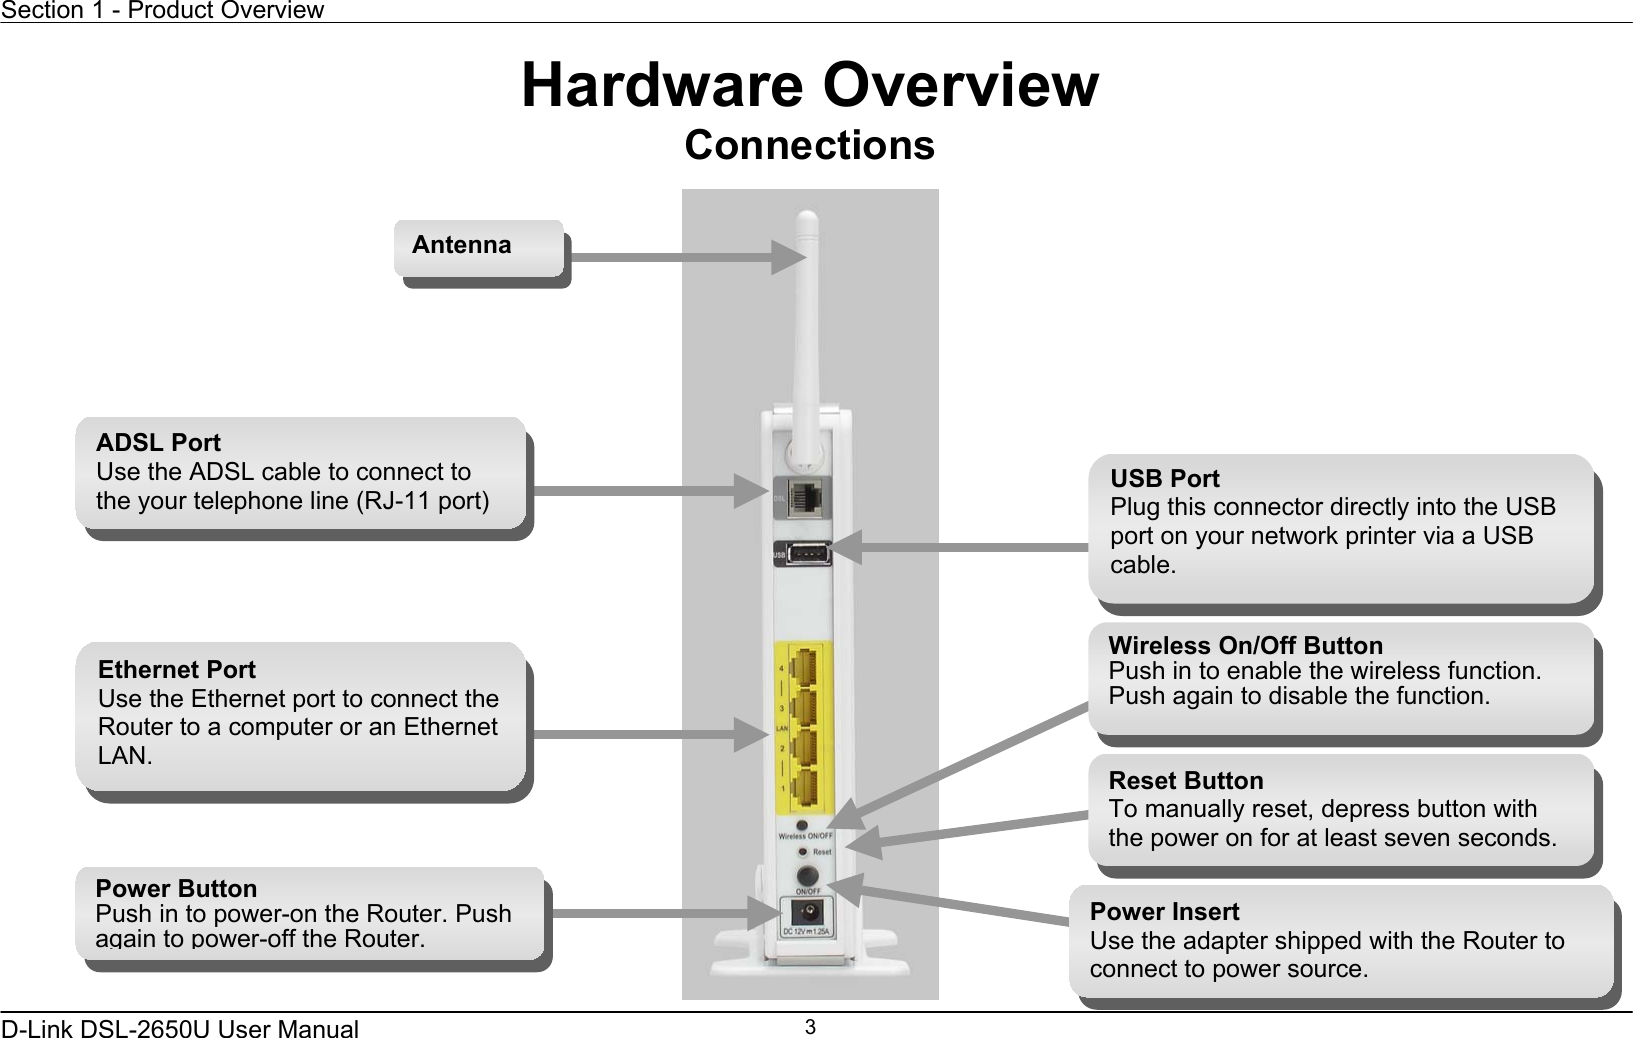 Section 1 - Product Overview  D-Link DSL-2650U User Manual    3Hardware Overview Connections  Power Insert Use the adapter shipped with the Router to connect to power source. Power ButtonPush in to power-on the Router. Push again to power-off the Router. Ethernet Port Use the Ethernet port to connect the Router to a computer or an Ethernet LAN. ADSL Port Use the ADSL cable to connect to the your telephone line (RJ-11 port) Reset Button To manually reset, depress button with the power on for at least seven seconds. Antenna Wireless On/Off ButtonPush in to enable the wireless function. Push again to disable the function. USB PortPlug this connector directly into the USB port on your network printer via a USB cable. 